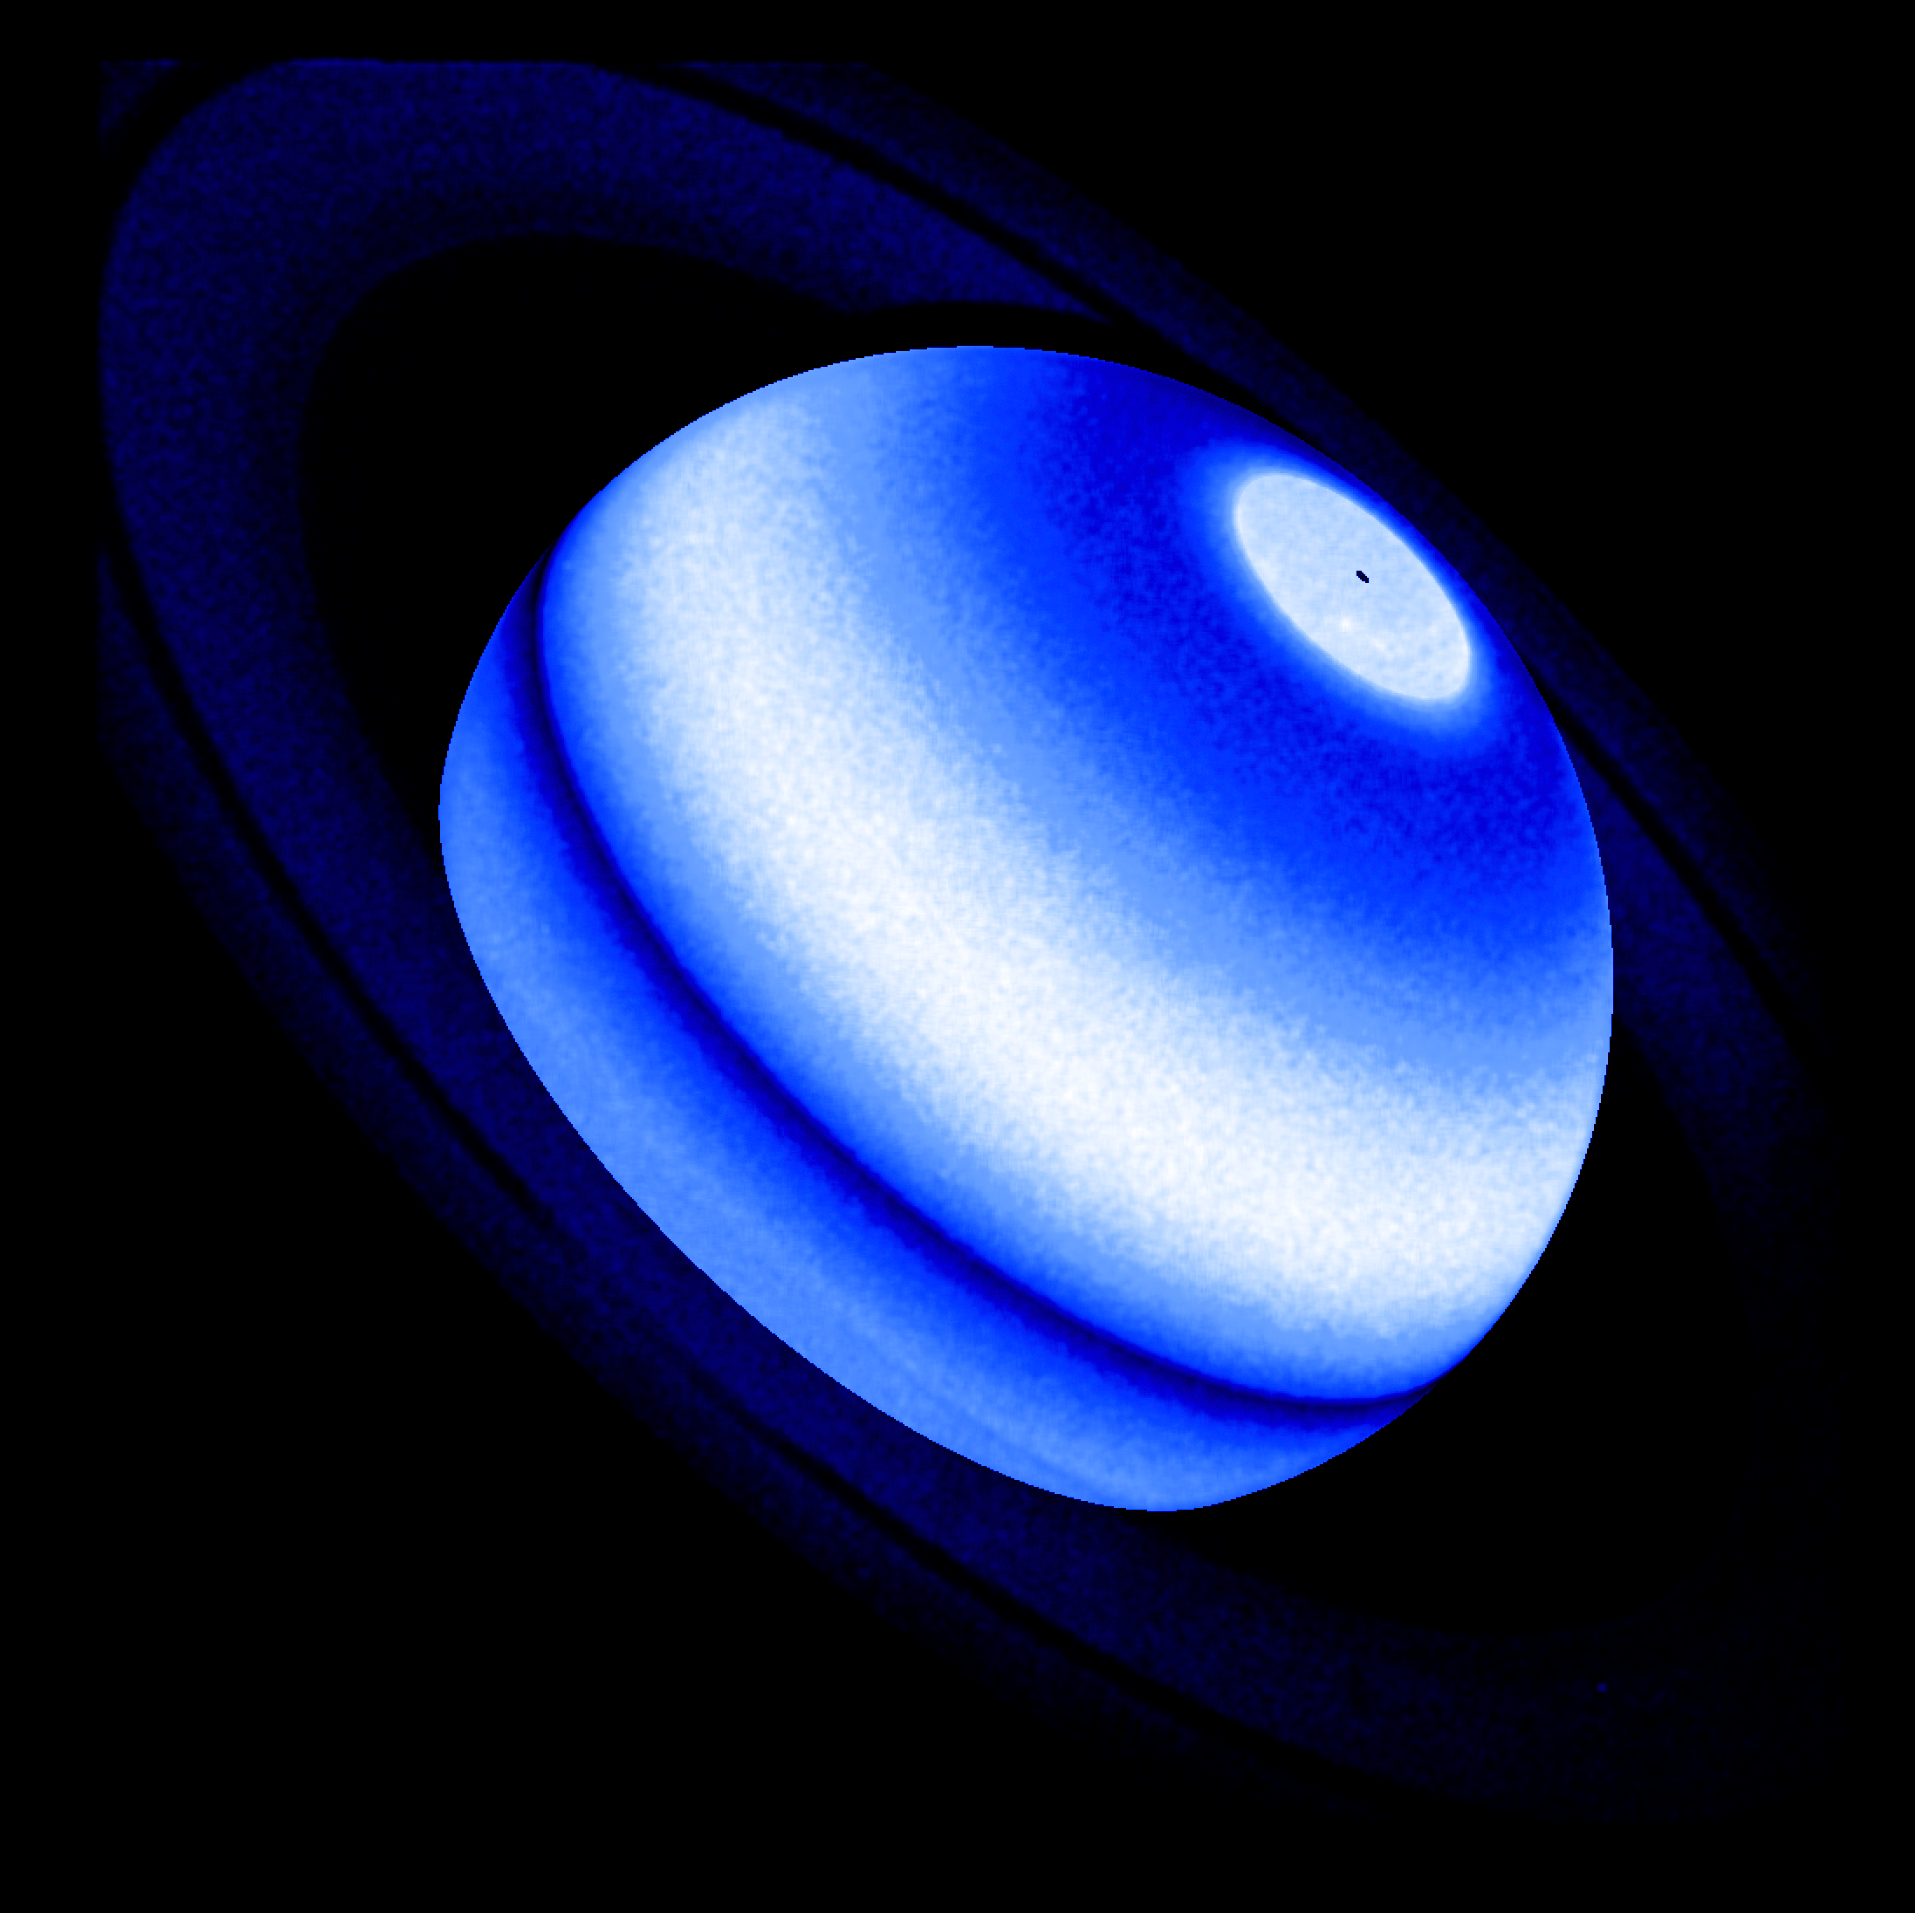 Blue, tilted, oblate sphere that is striped with dark blue, light blue, and white bands that run from the upper left of the sphere to the lower right.